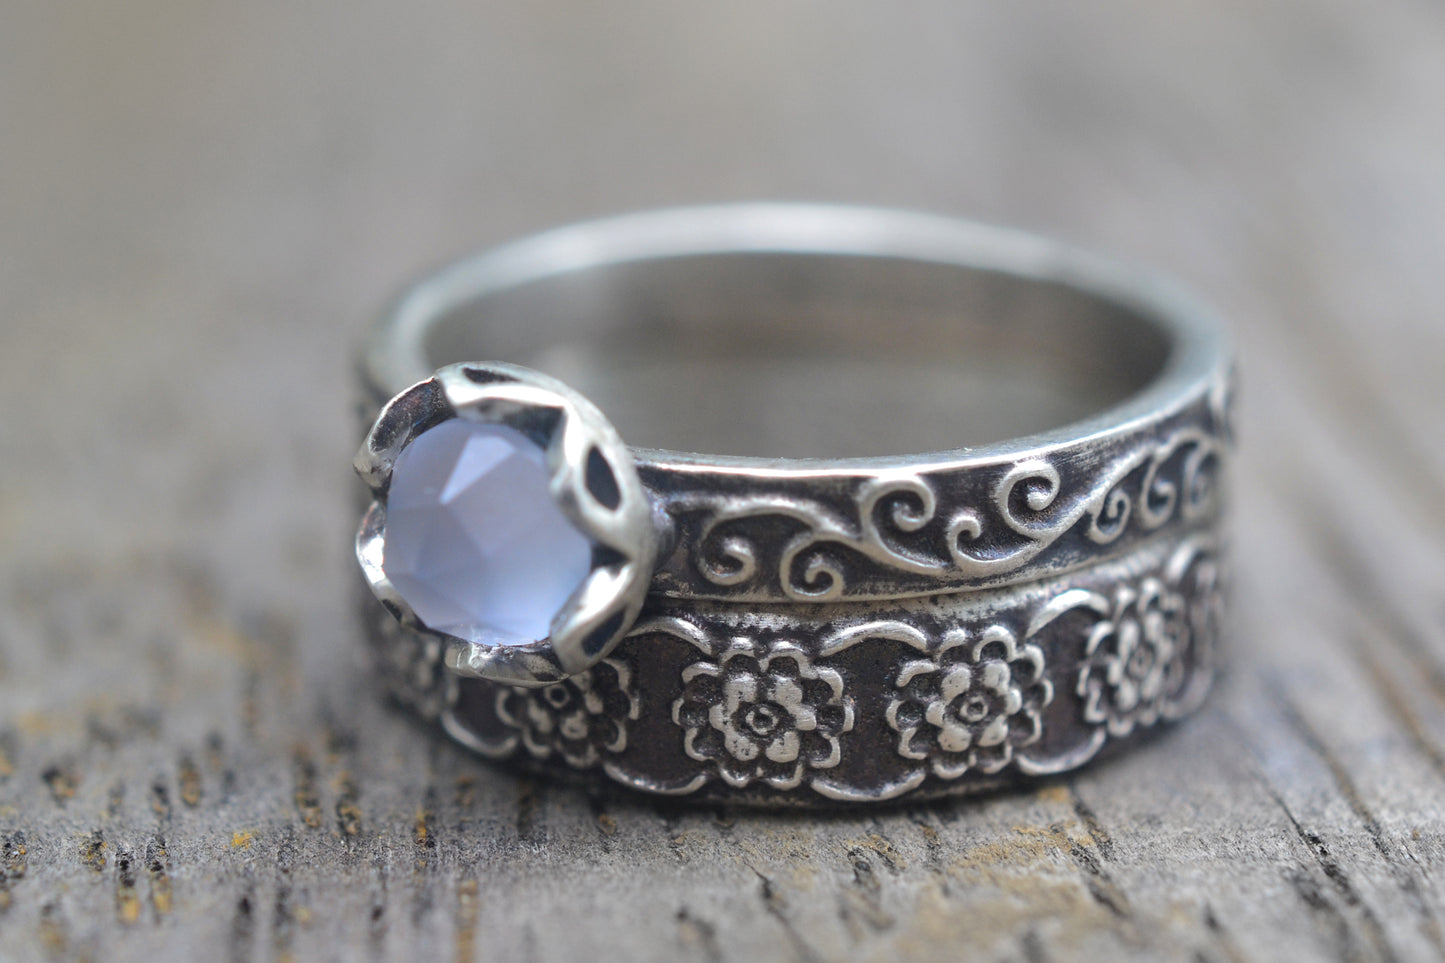 Chalcedony Bridal Set in Patterned Sterling